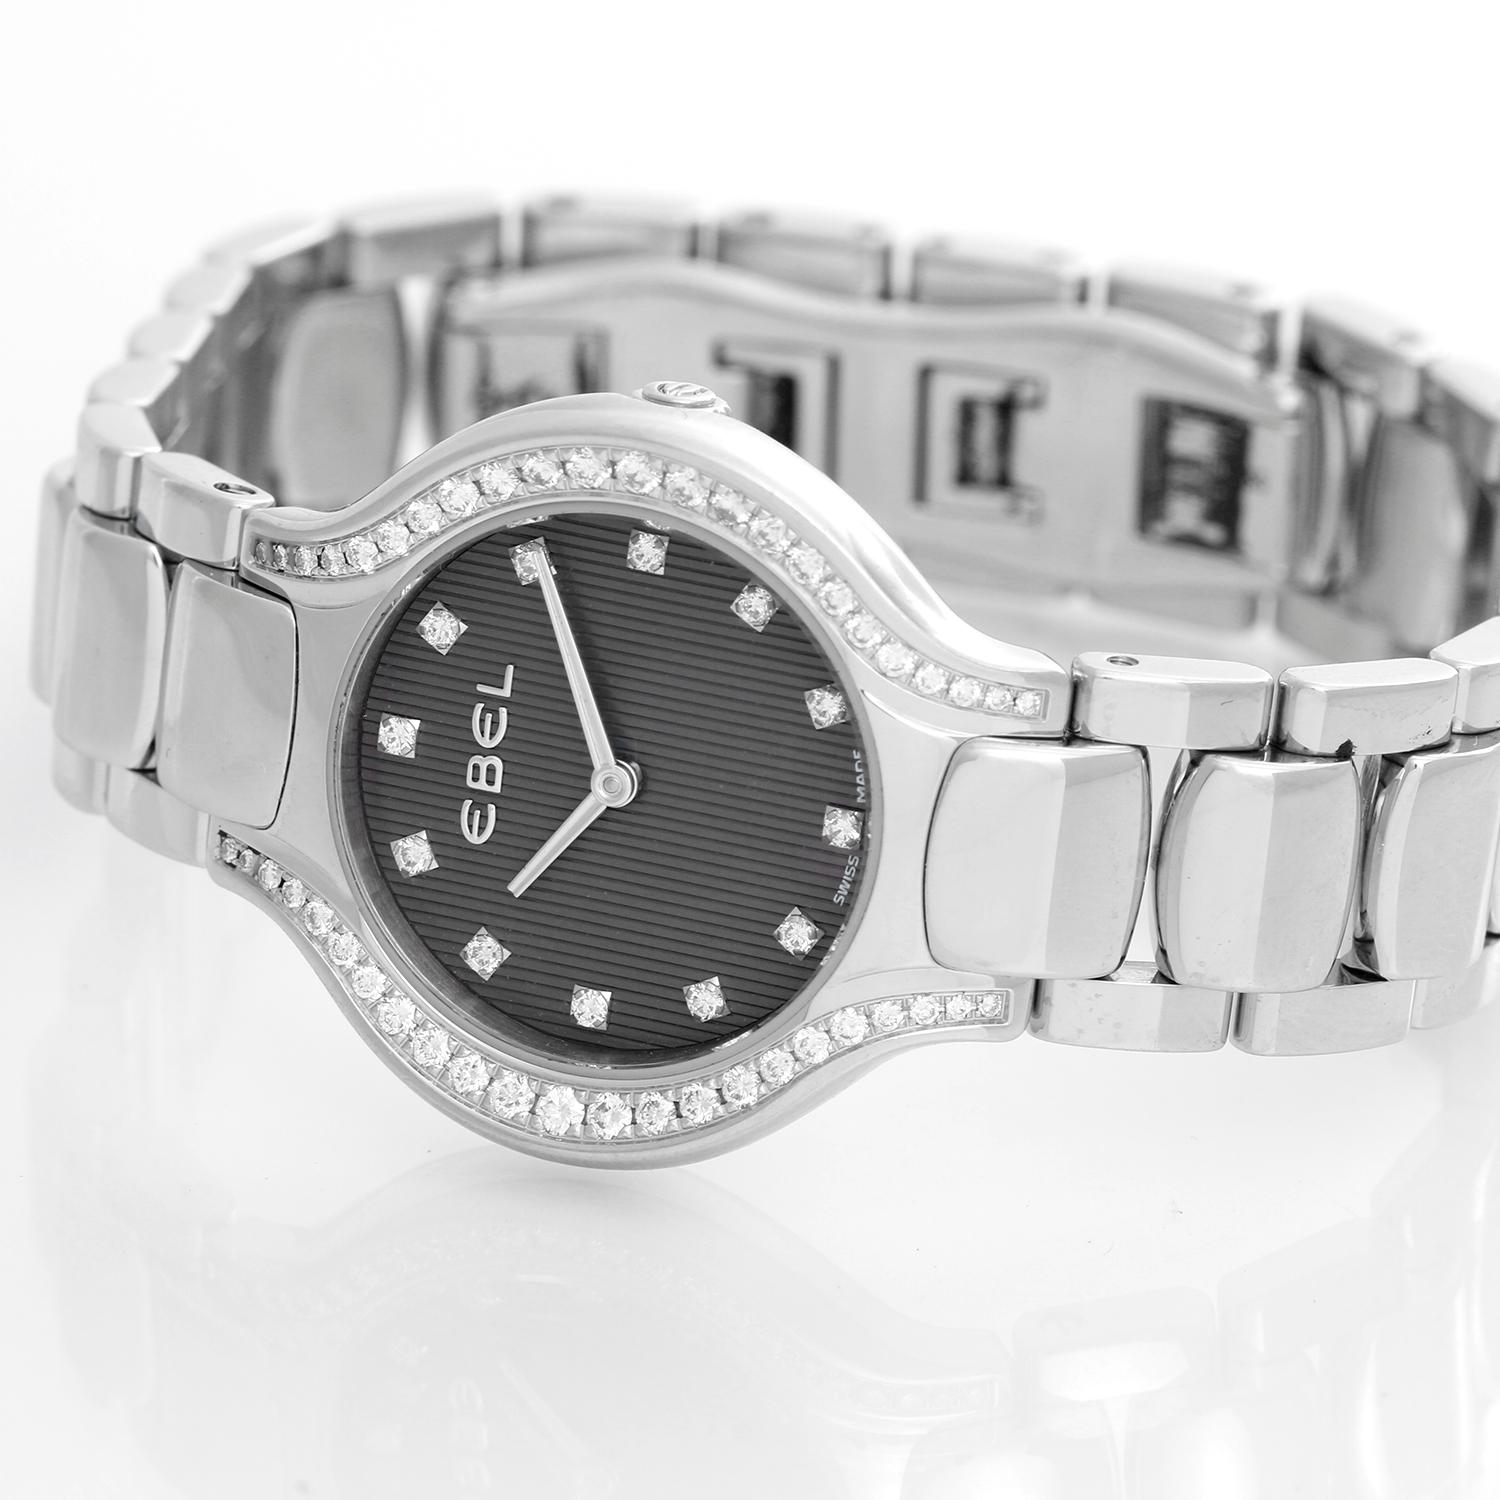 Ebel Beluga Stainless Steel & Diamond Ladies Watch 1215856 - Quartz movement. Stainless steel case with diamond bezel and lugs (26mm diameter). Slate grey  dial with diamond hour markers. Stainless steel bracelet (will fit apx. 6-1/4-inch wrist).